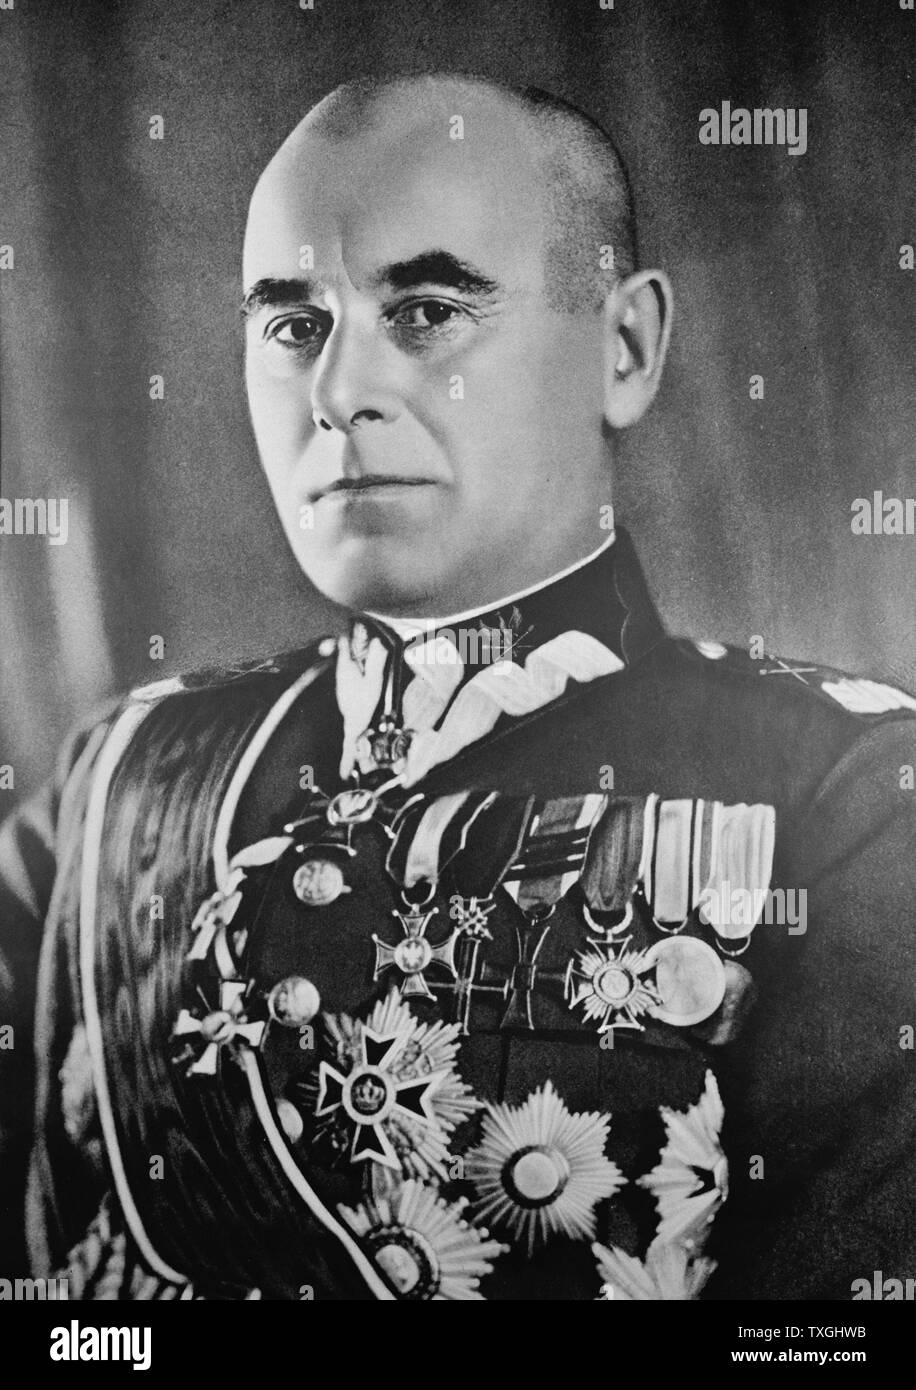 Photographic portrait of Edward Rydz-Smigly (1886-1941) a Polish politician, statesman, Marshal of Poland, Commander-in-Chief of Poland's armed forces. Dated 20th Century Stock Photo